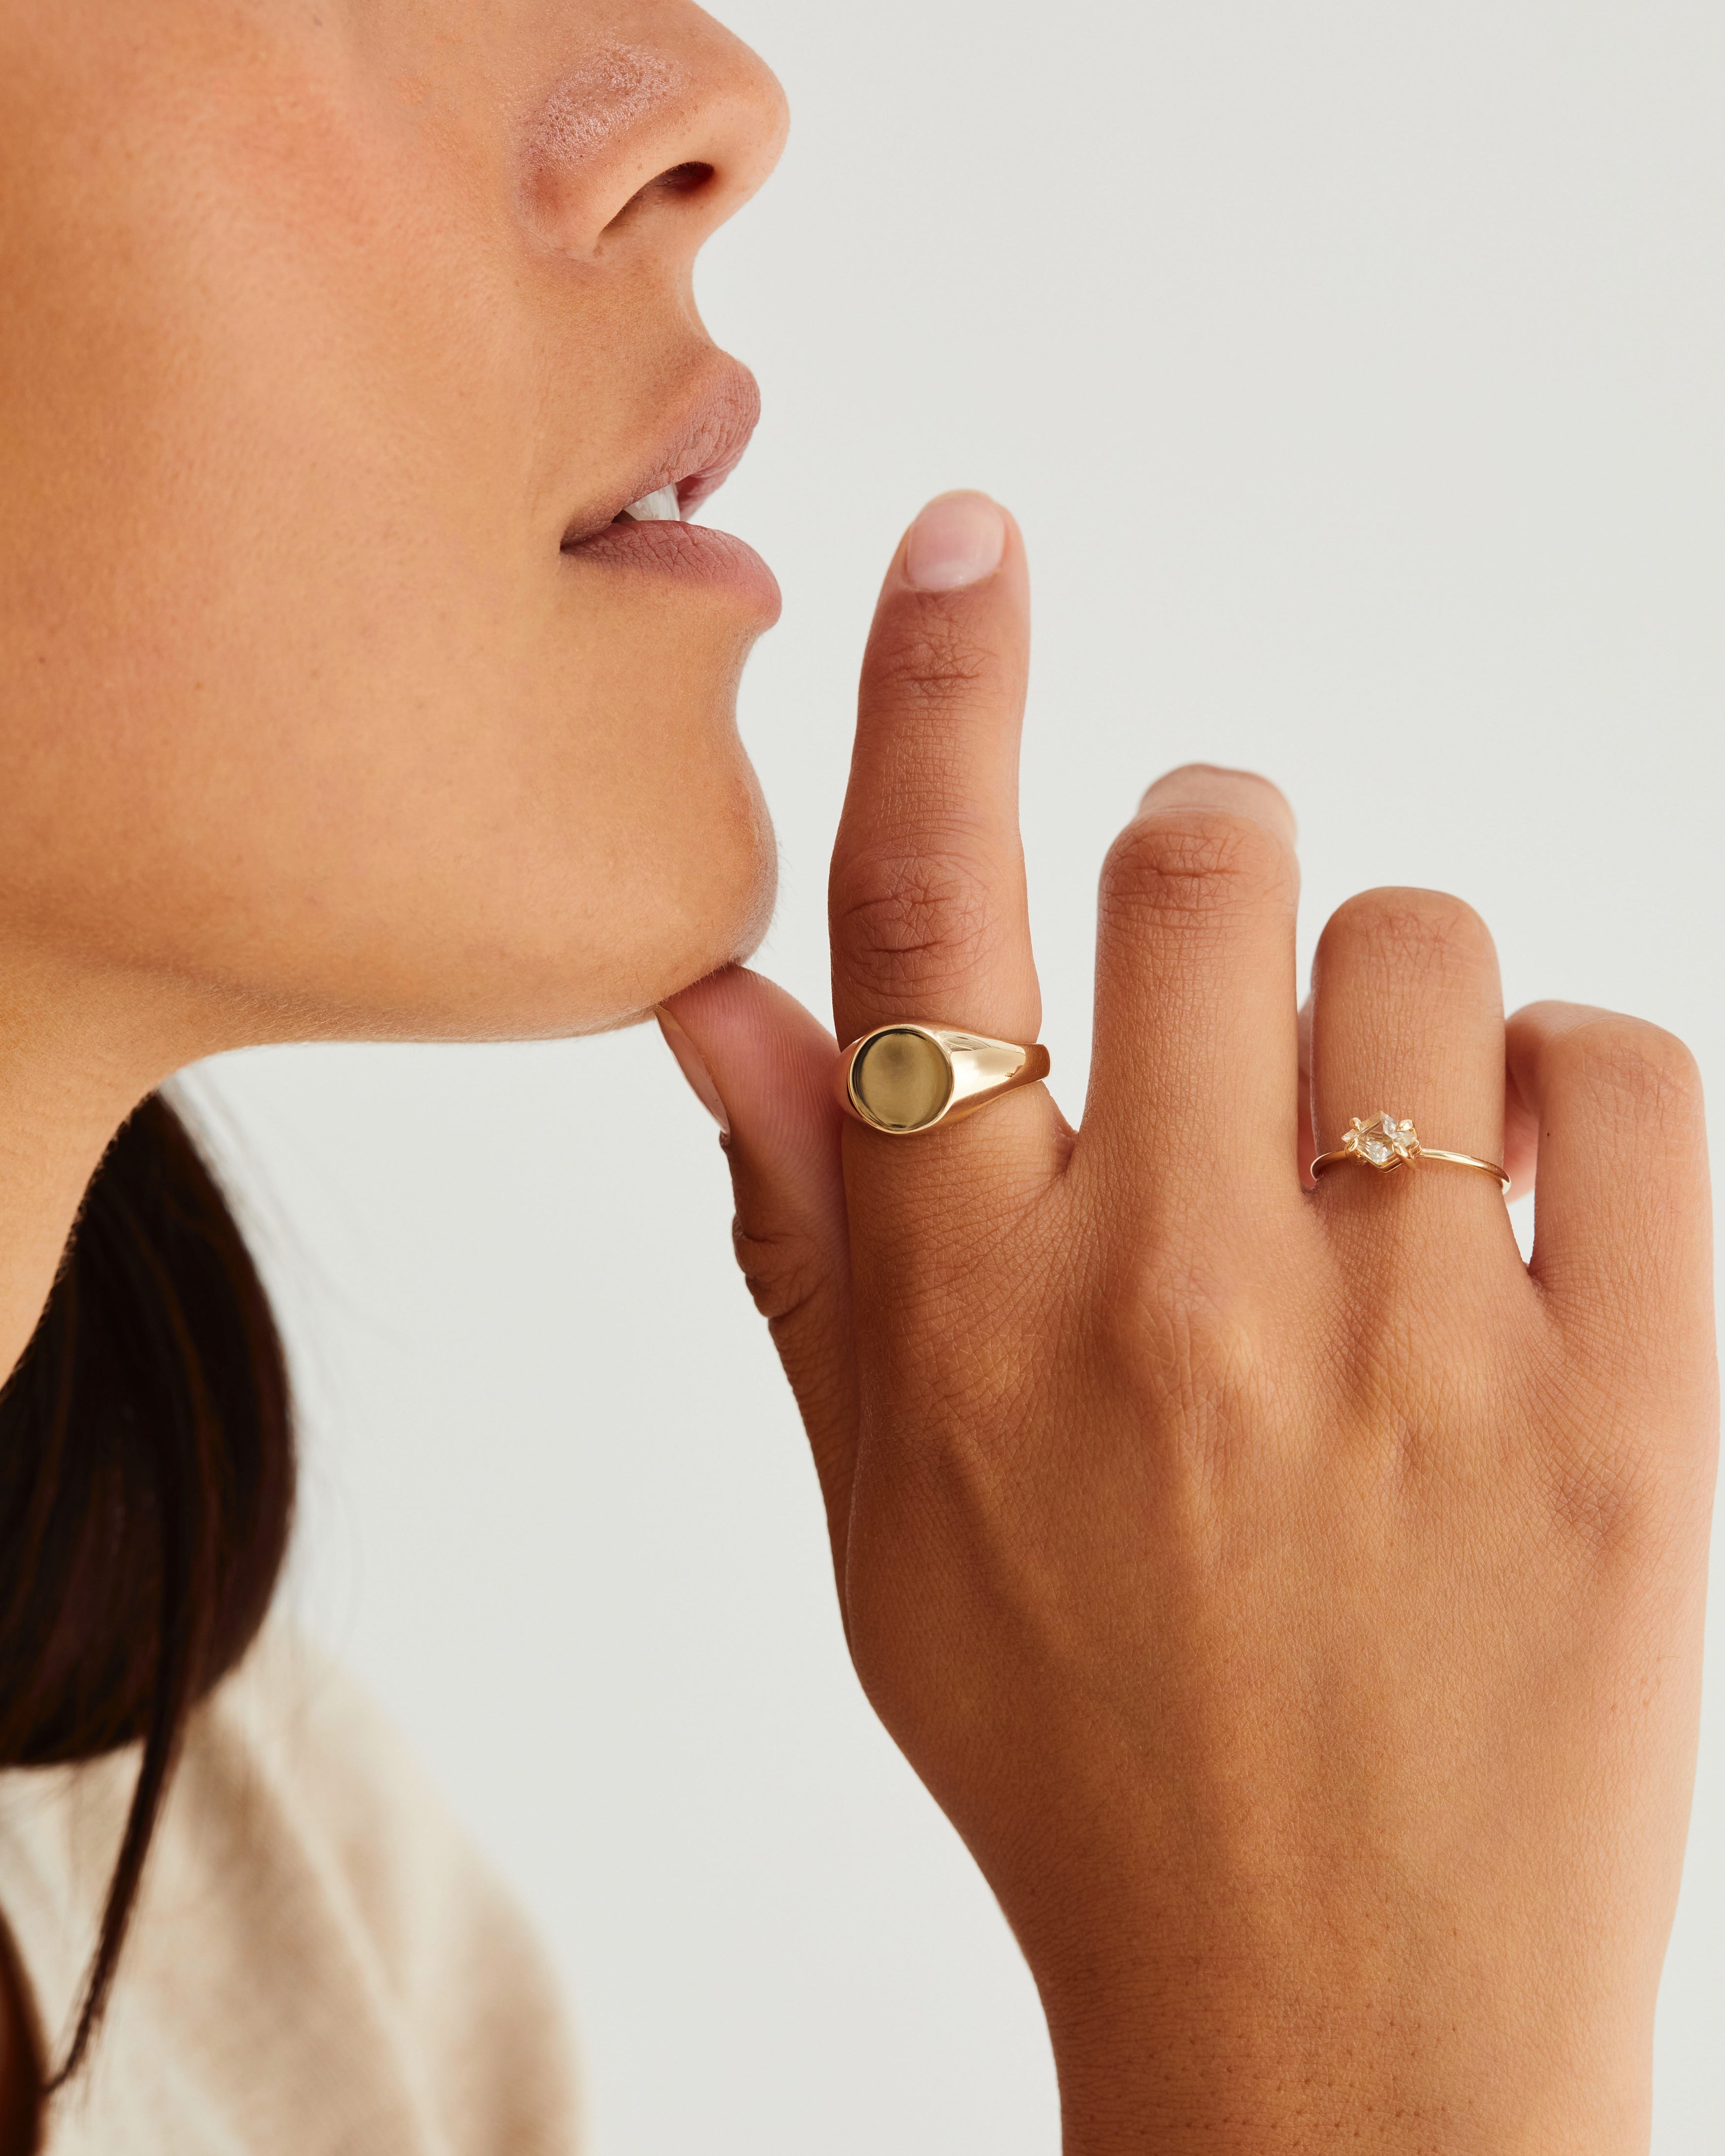 13 Best Signet Rings for Women - Cute Personalized Initial Rings